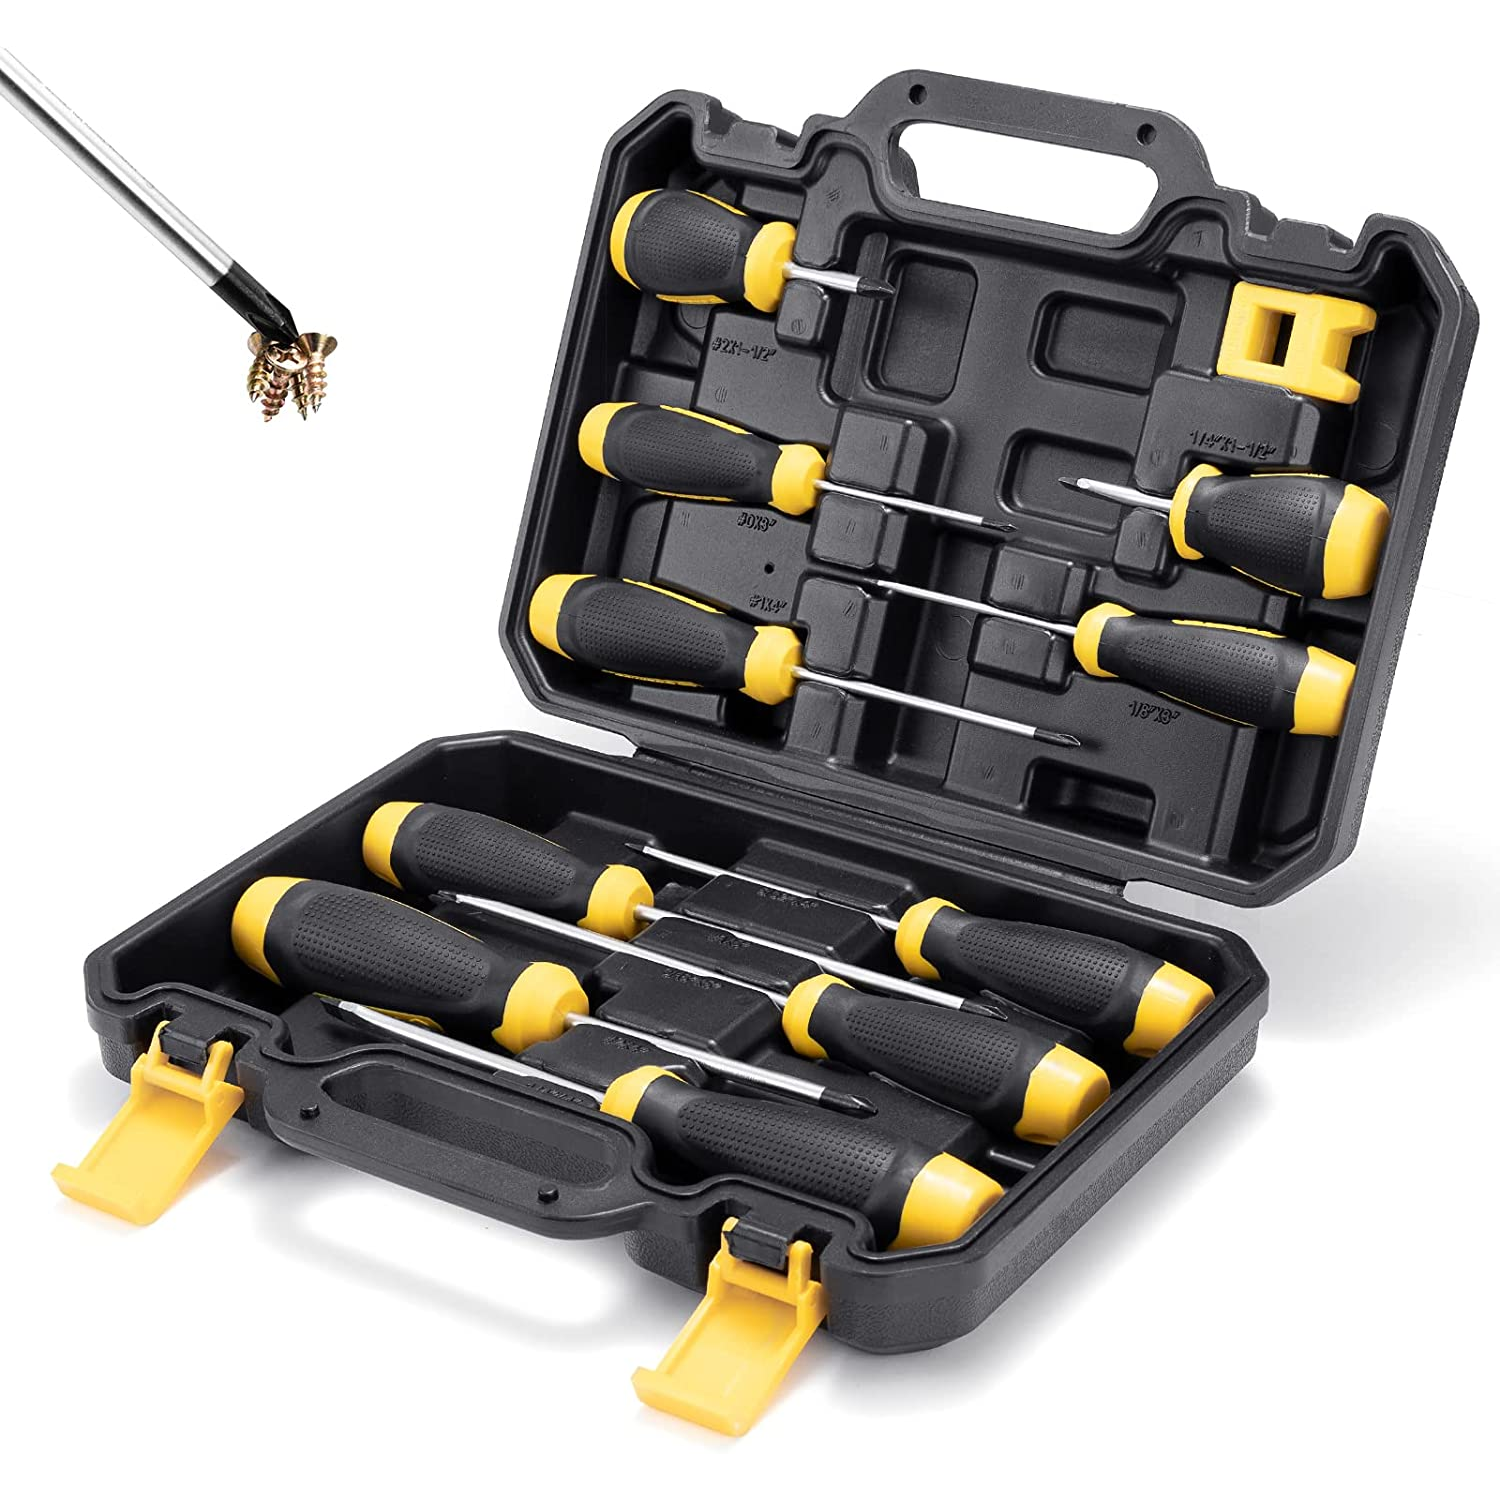 10 Piece Magnetic Screwdriver Set with Carrying Case - South East Clearance Centre